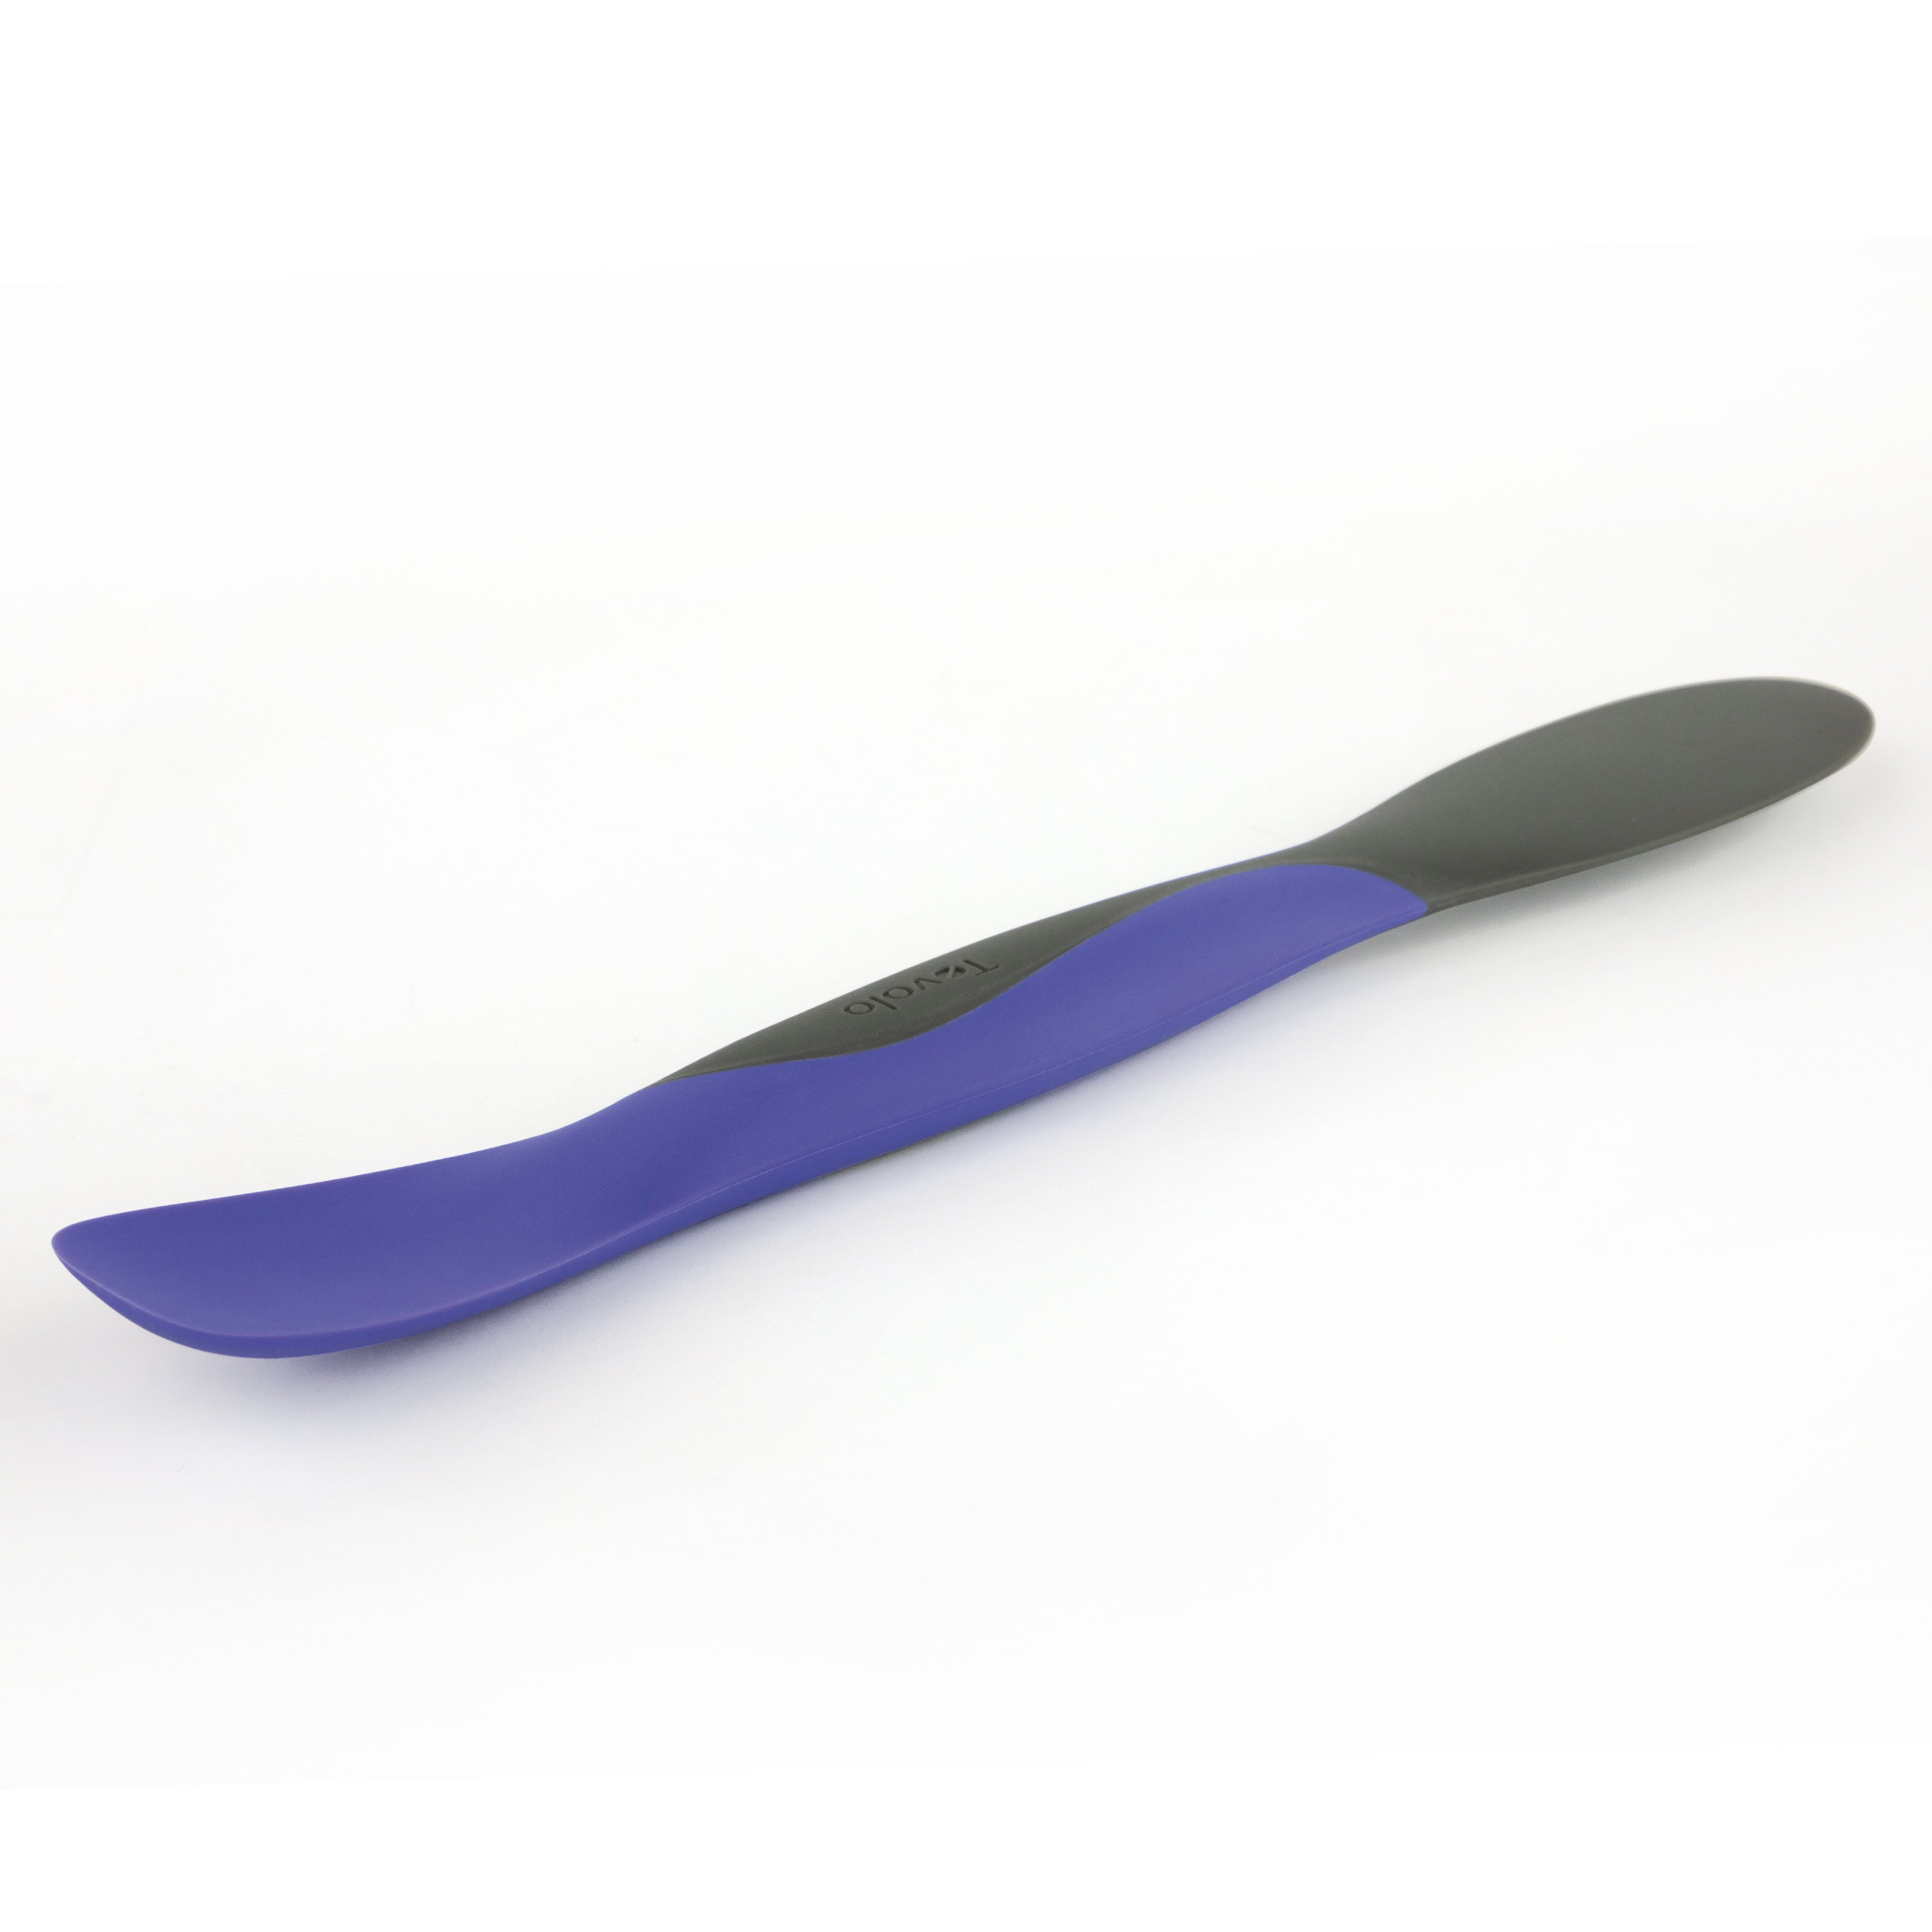 Tovolo Mini Scoop and Spread Tool & Reviews